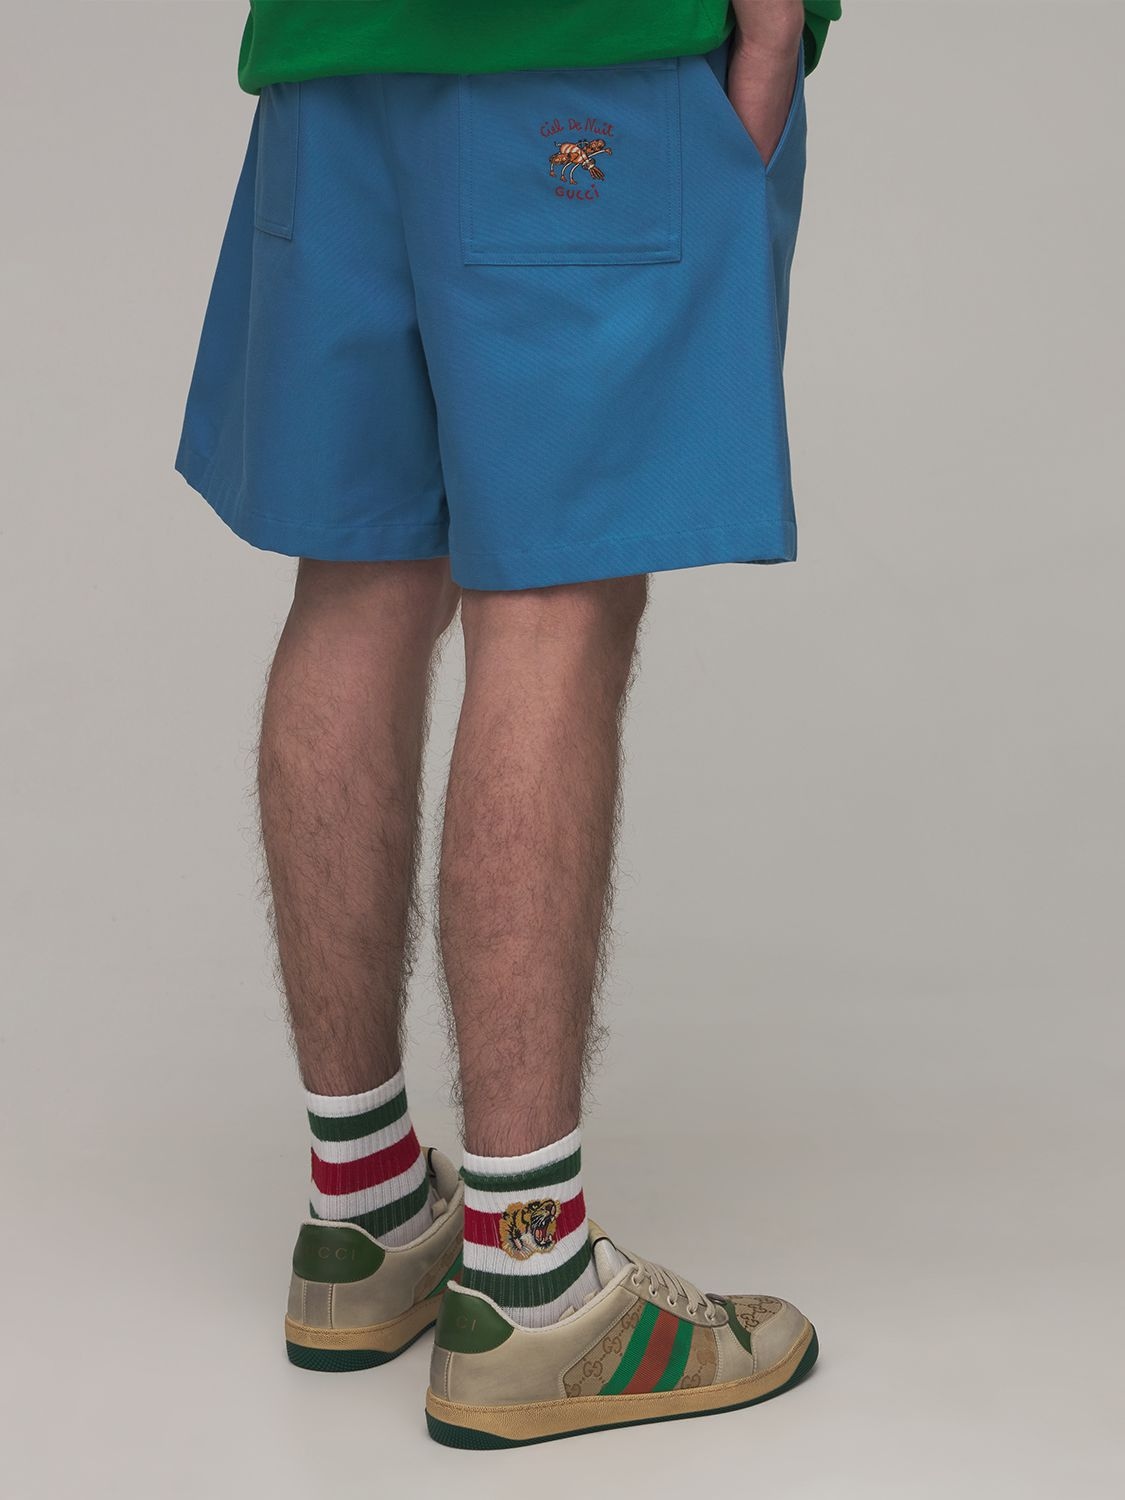 Gucci Freya Hartas Animal Embroidery Shorts In Turquoise